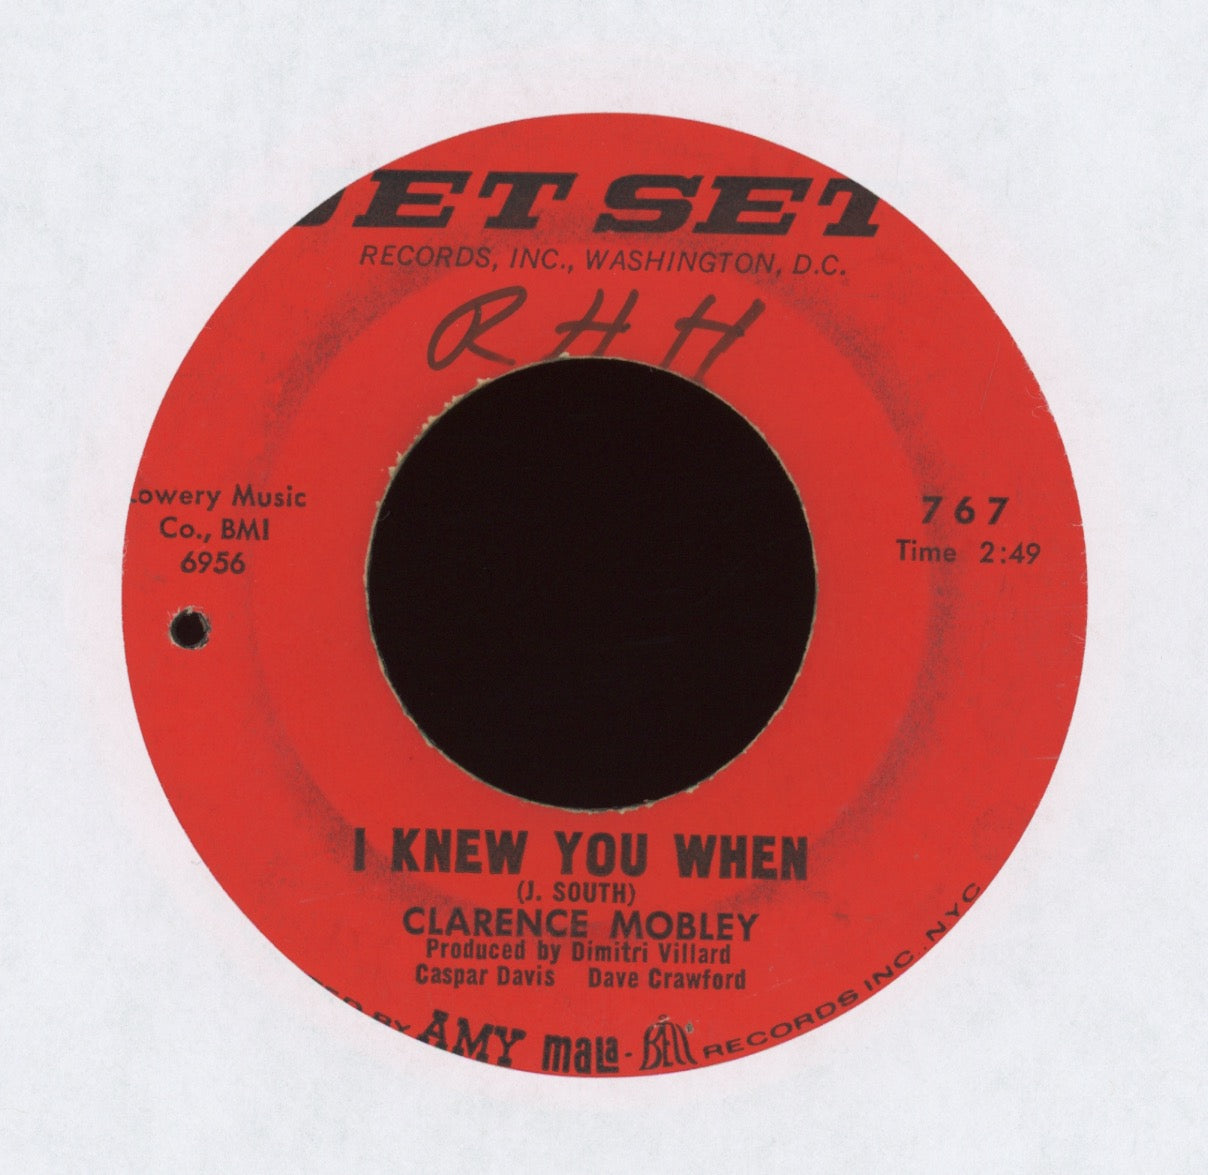 Clarence Mobley - I Knew You When on Jet Set Deep Soul 45